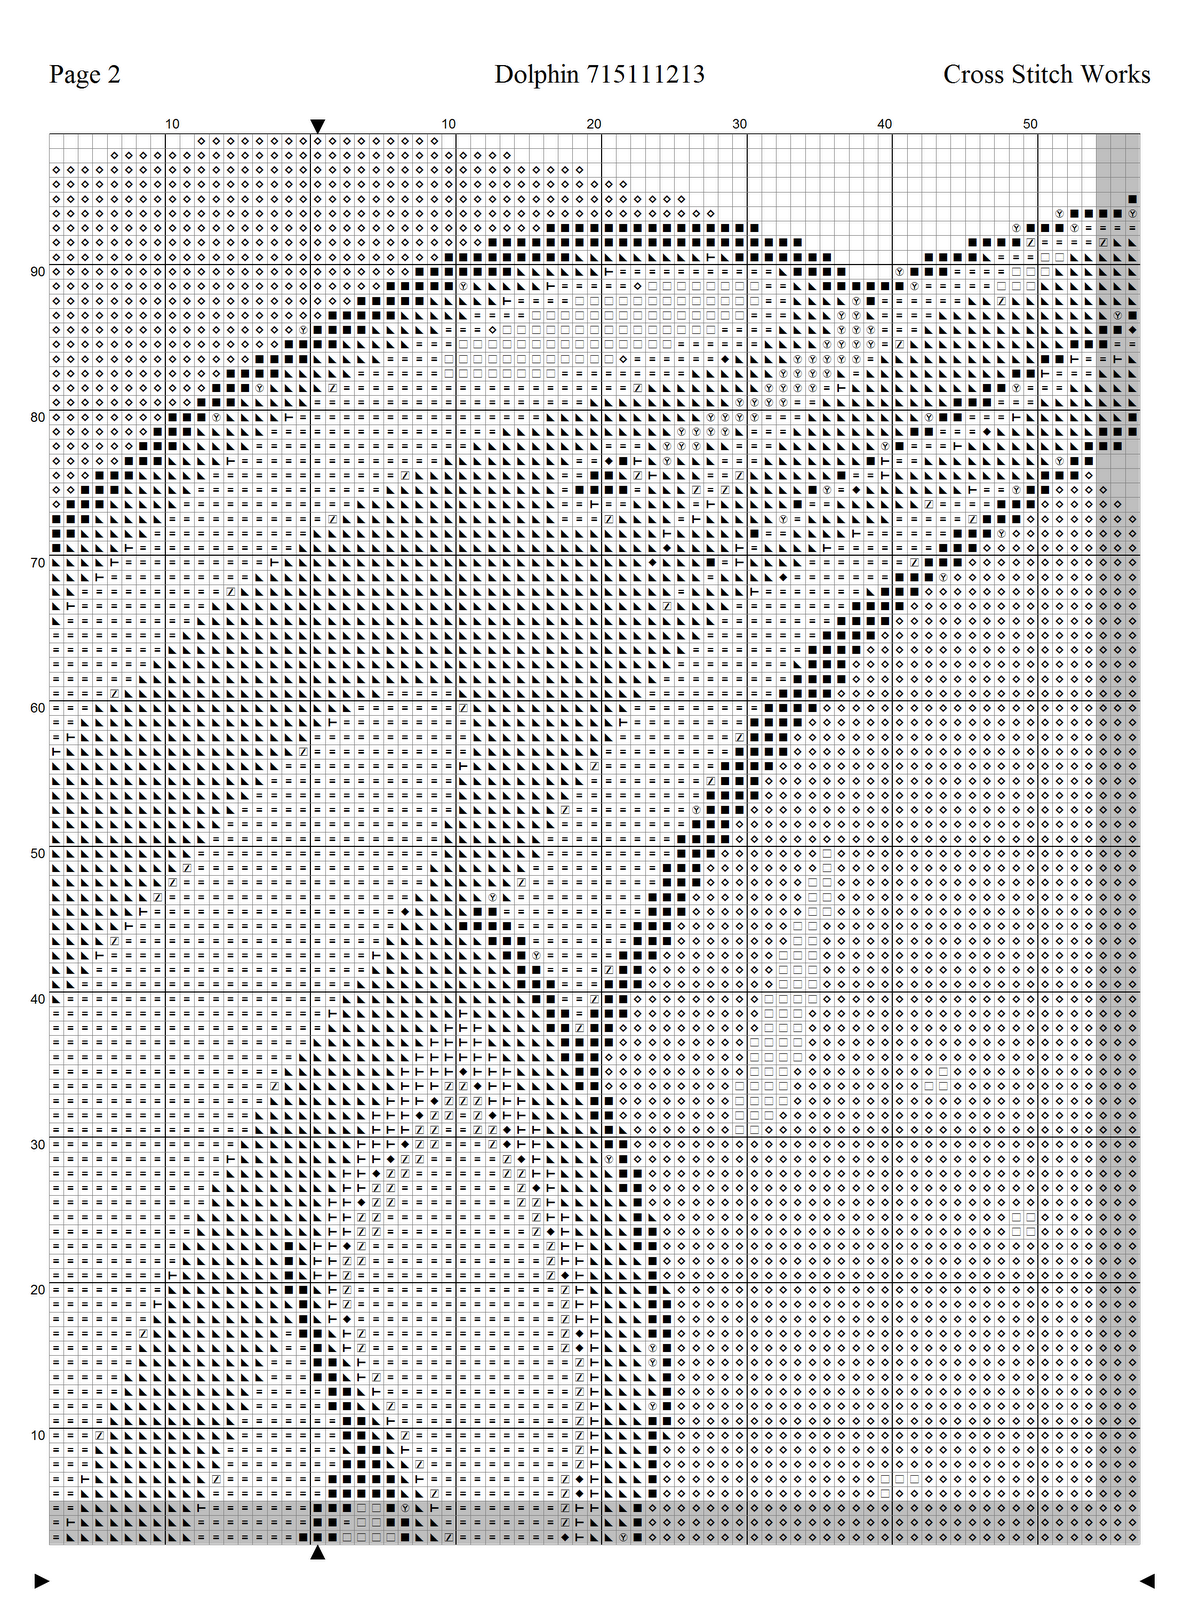 stitch cross dolphin patterns pattern works welcome printable chart